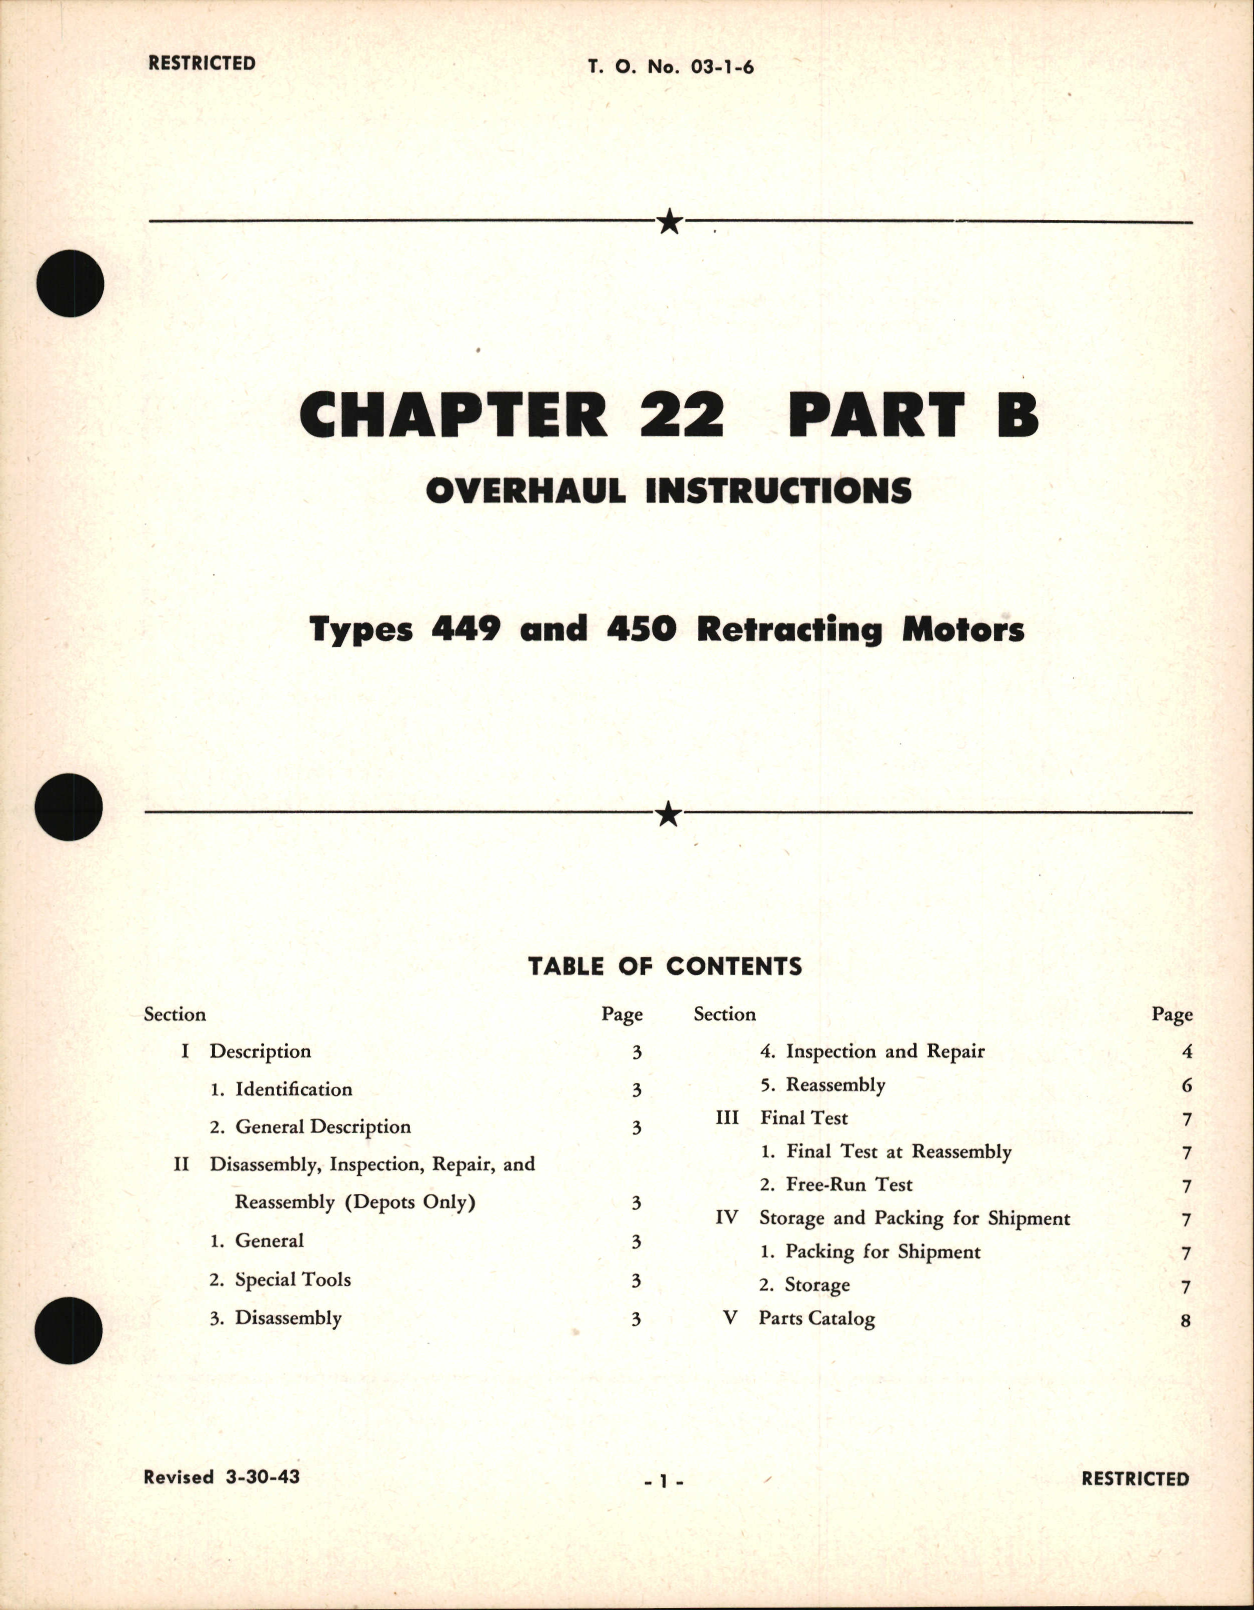 Sample page 1 from AirCorps Library document: Overhaul Instructions for Types 449 and 450 Retracting Motors